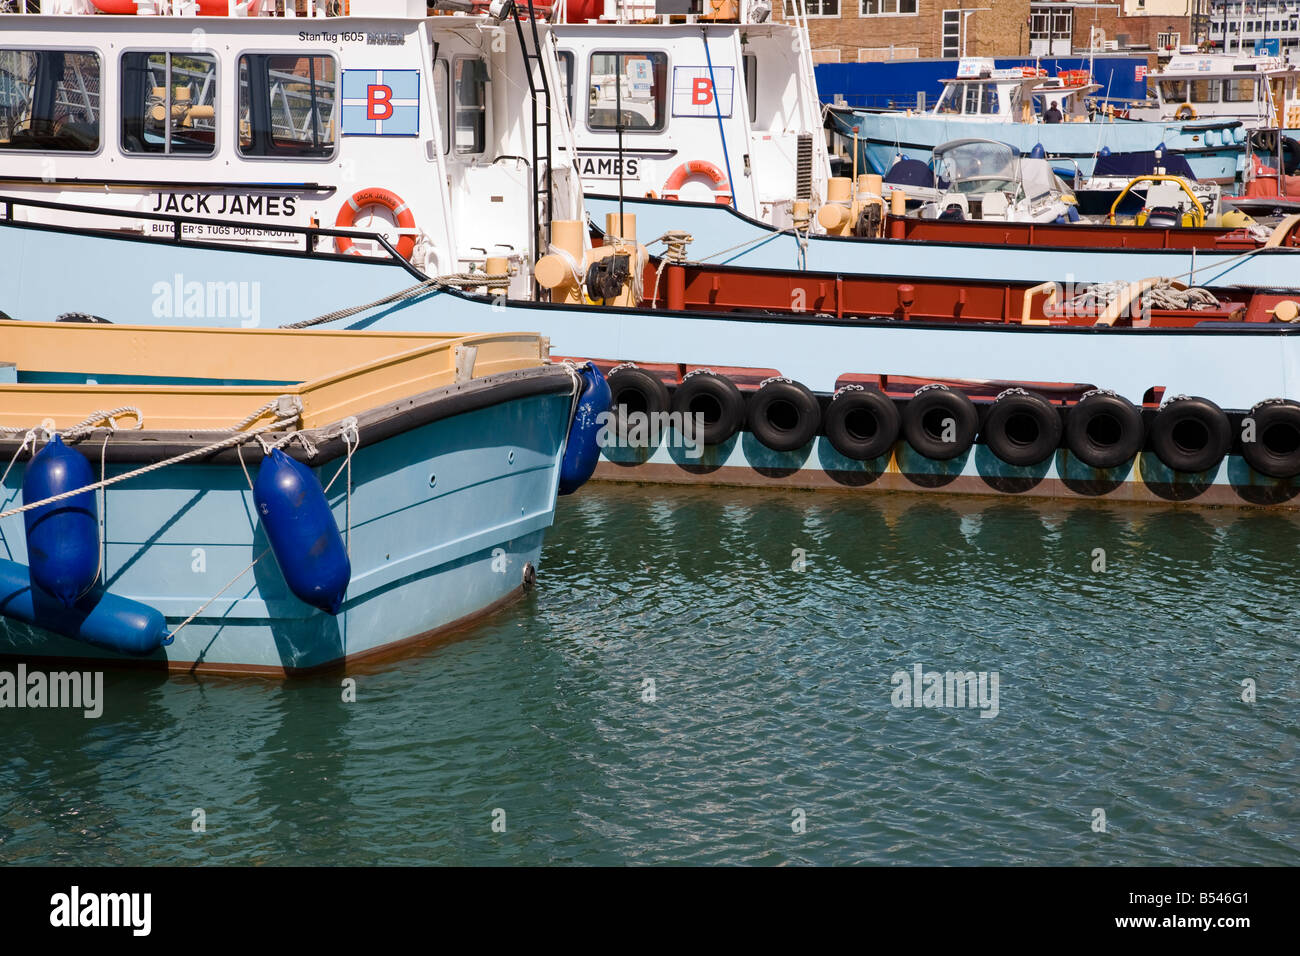 Various craft moored in Camber Dock, Portsmouth, Hampshire, England. Stock Photo